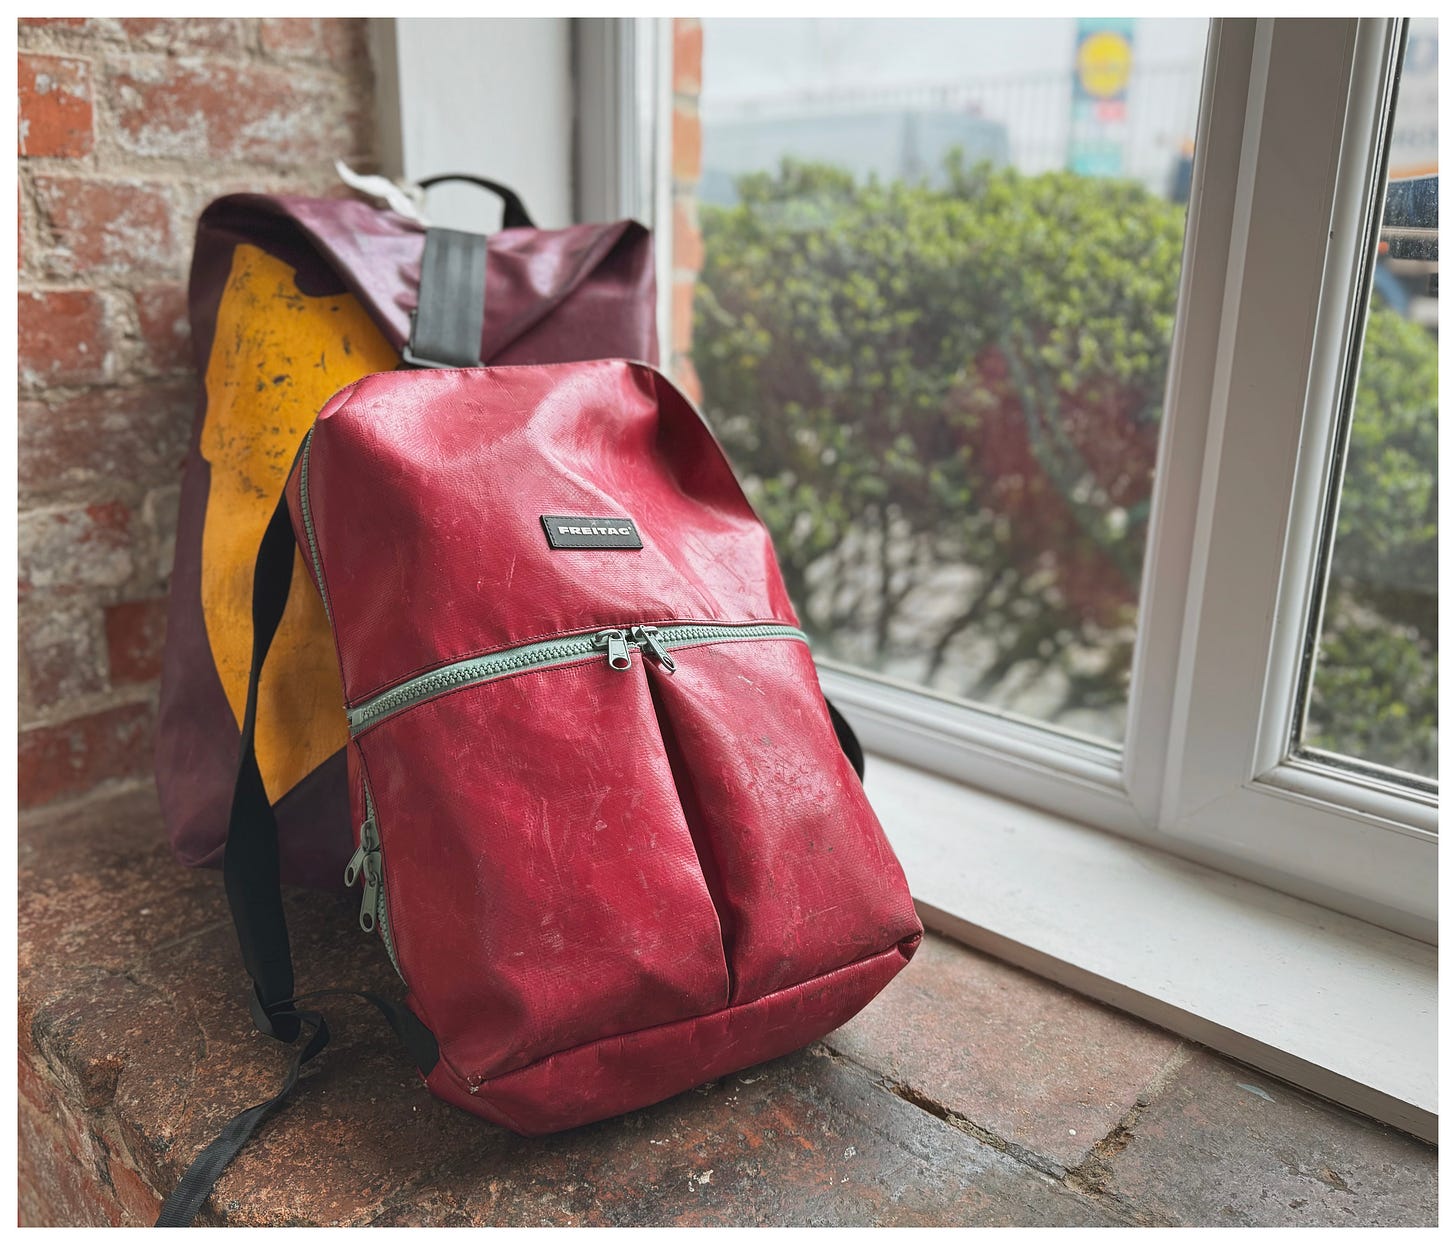 A colorful FREITAG backpack leans against a brick wall next to a window overlooking some bushes. 